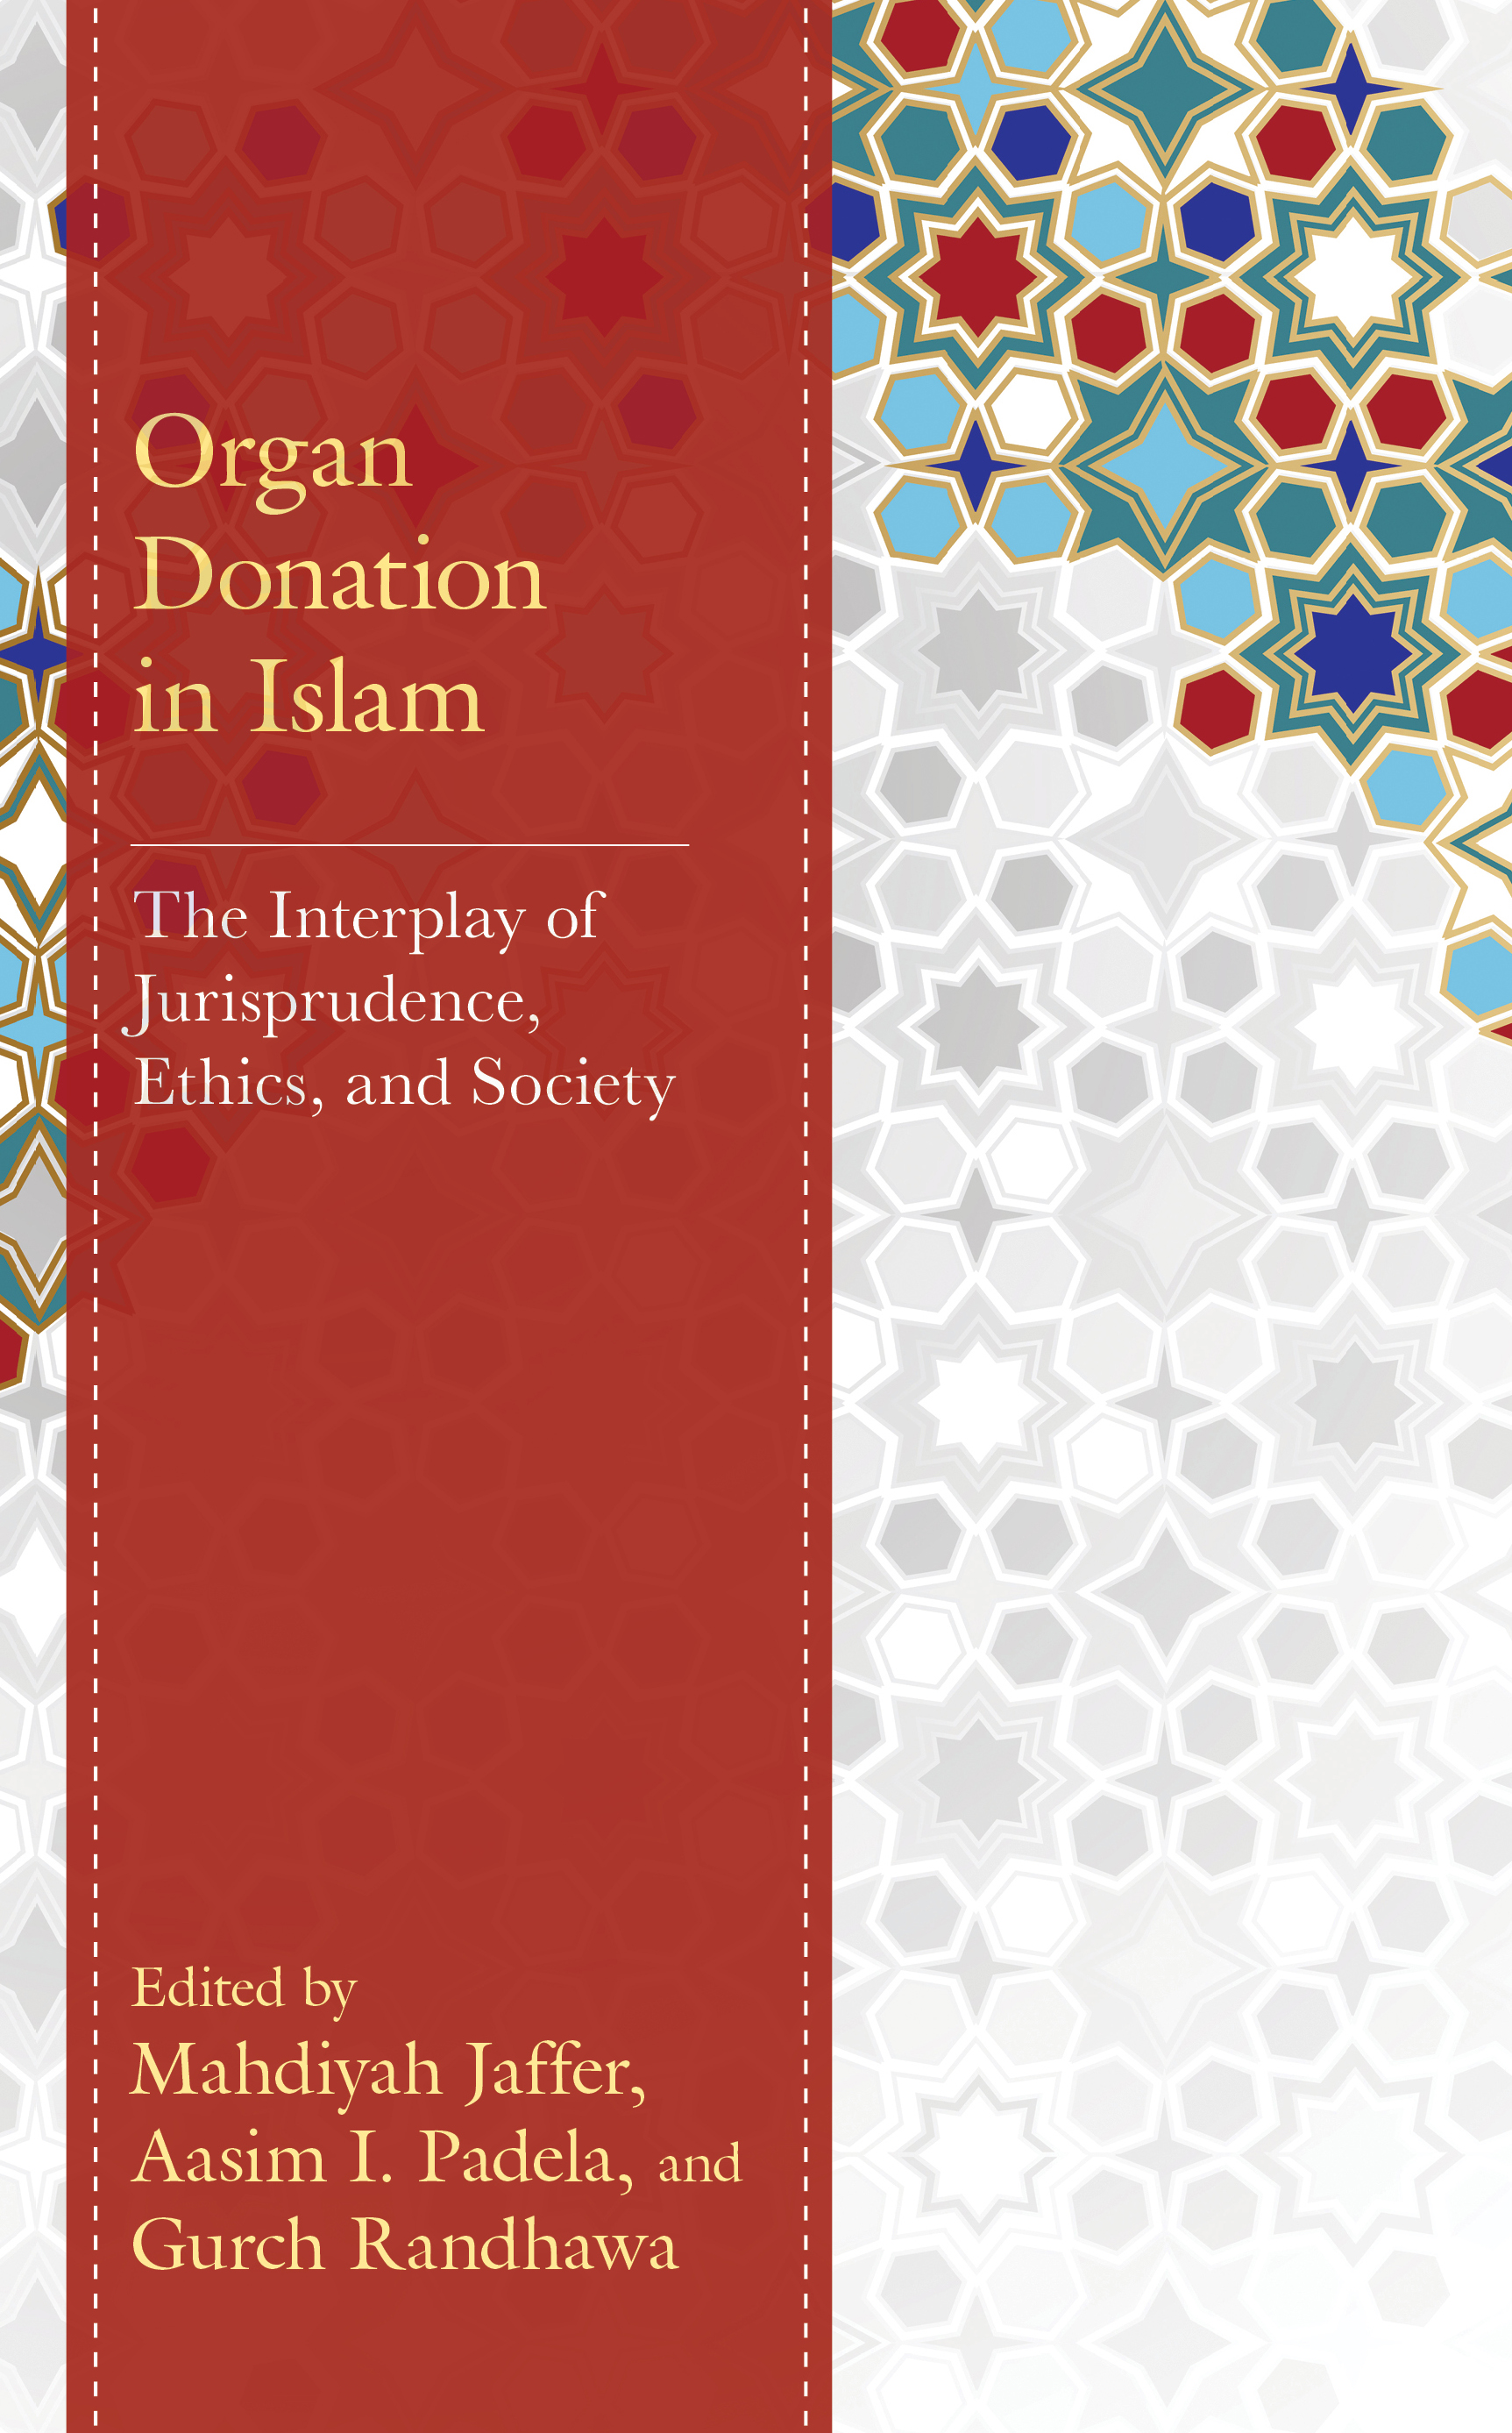 Organ Donation in Islam: The Interplay of Jurisprudence, Ethics, and Society